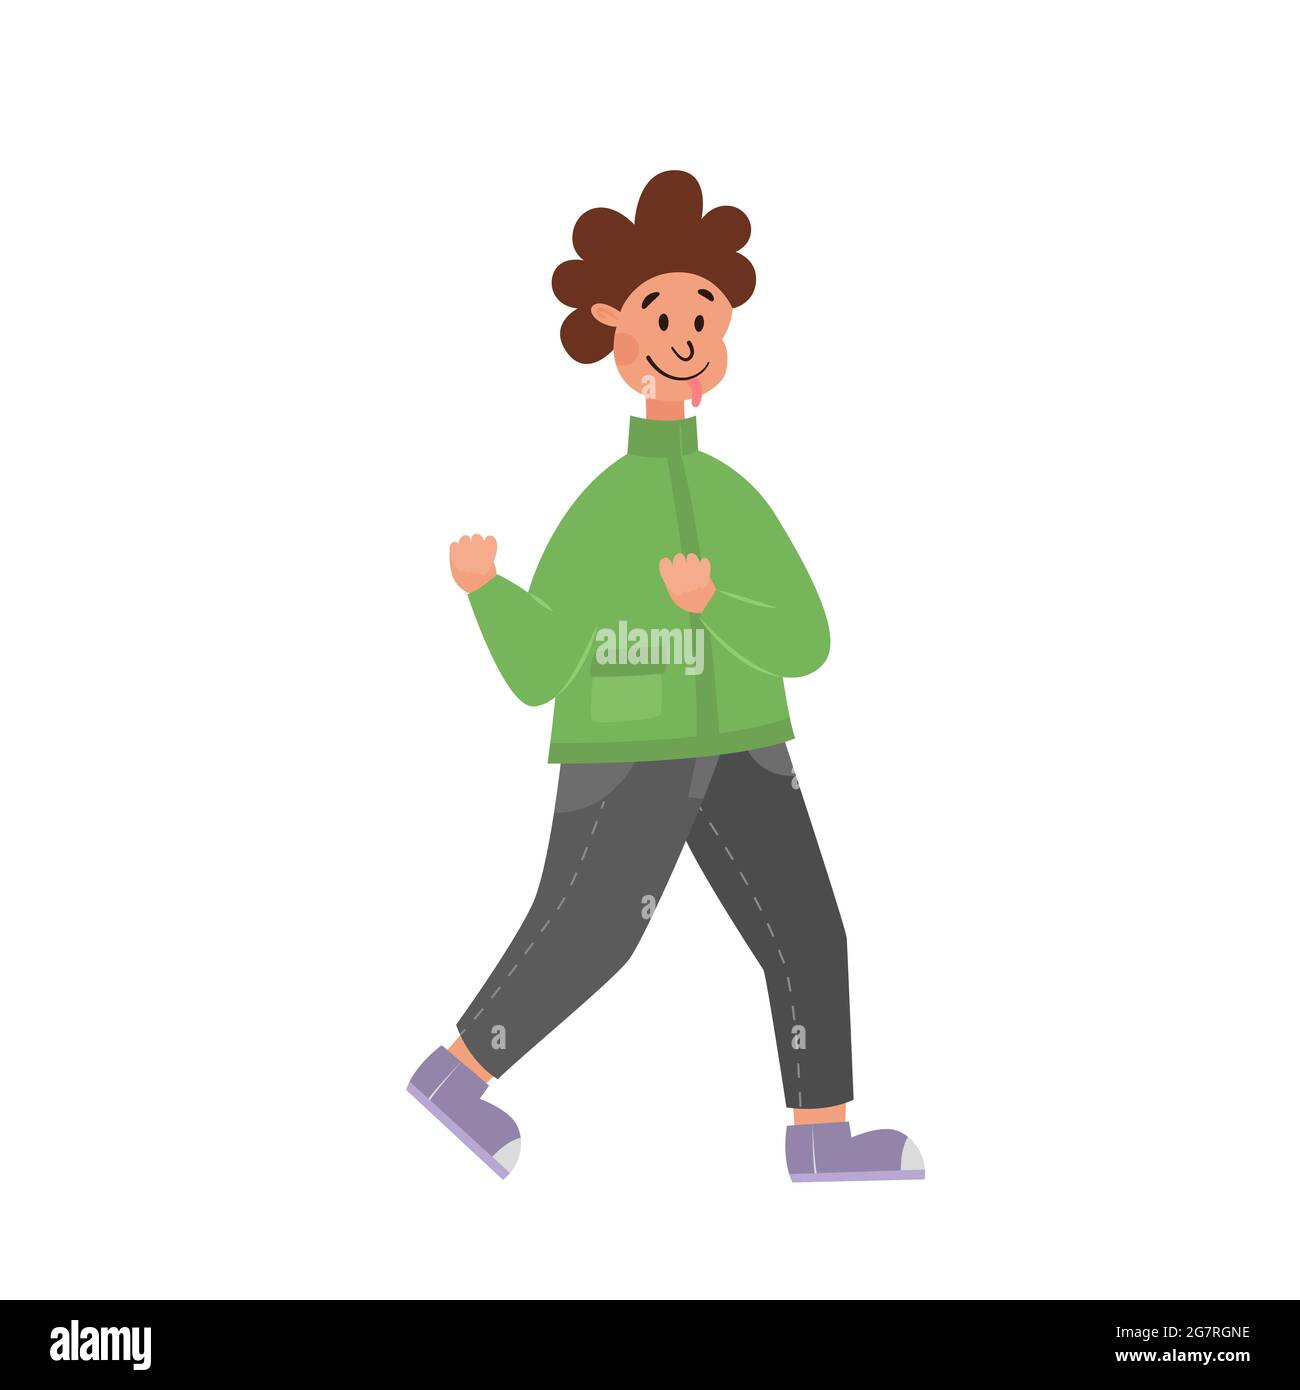 Funny curly little boy grimaces and shows his tongue. Colored cartoon flat illustration of a child playing or having fun dancing outdoors. Stock Vector